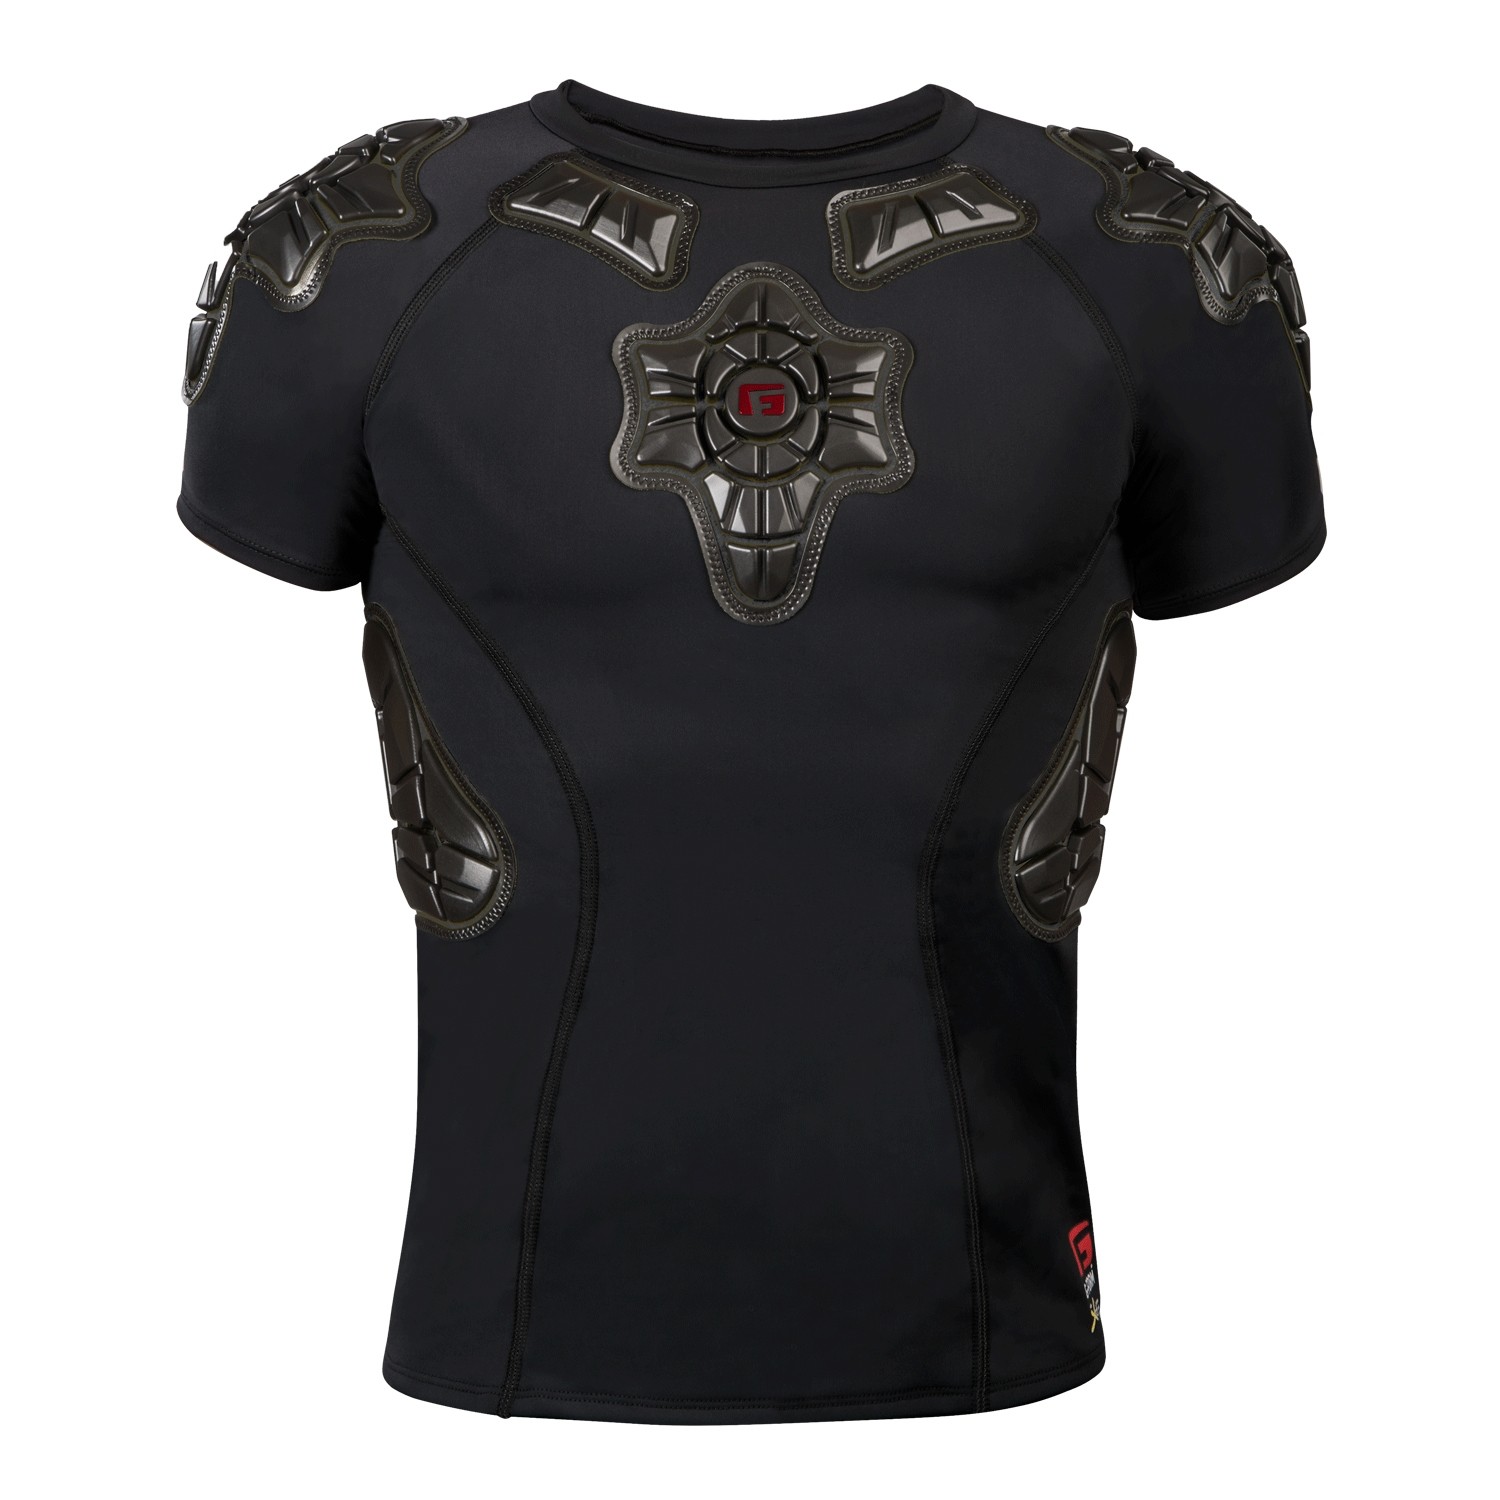 Pro-X Compression Shirt - Youth